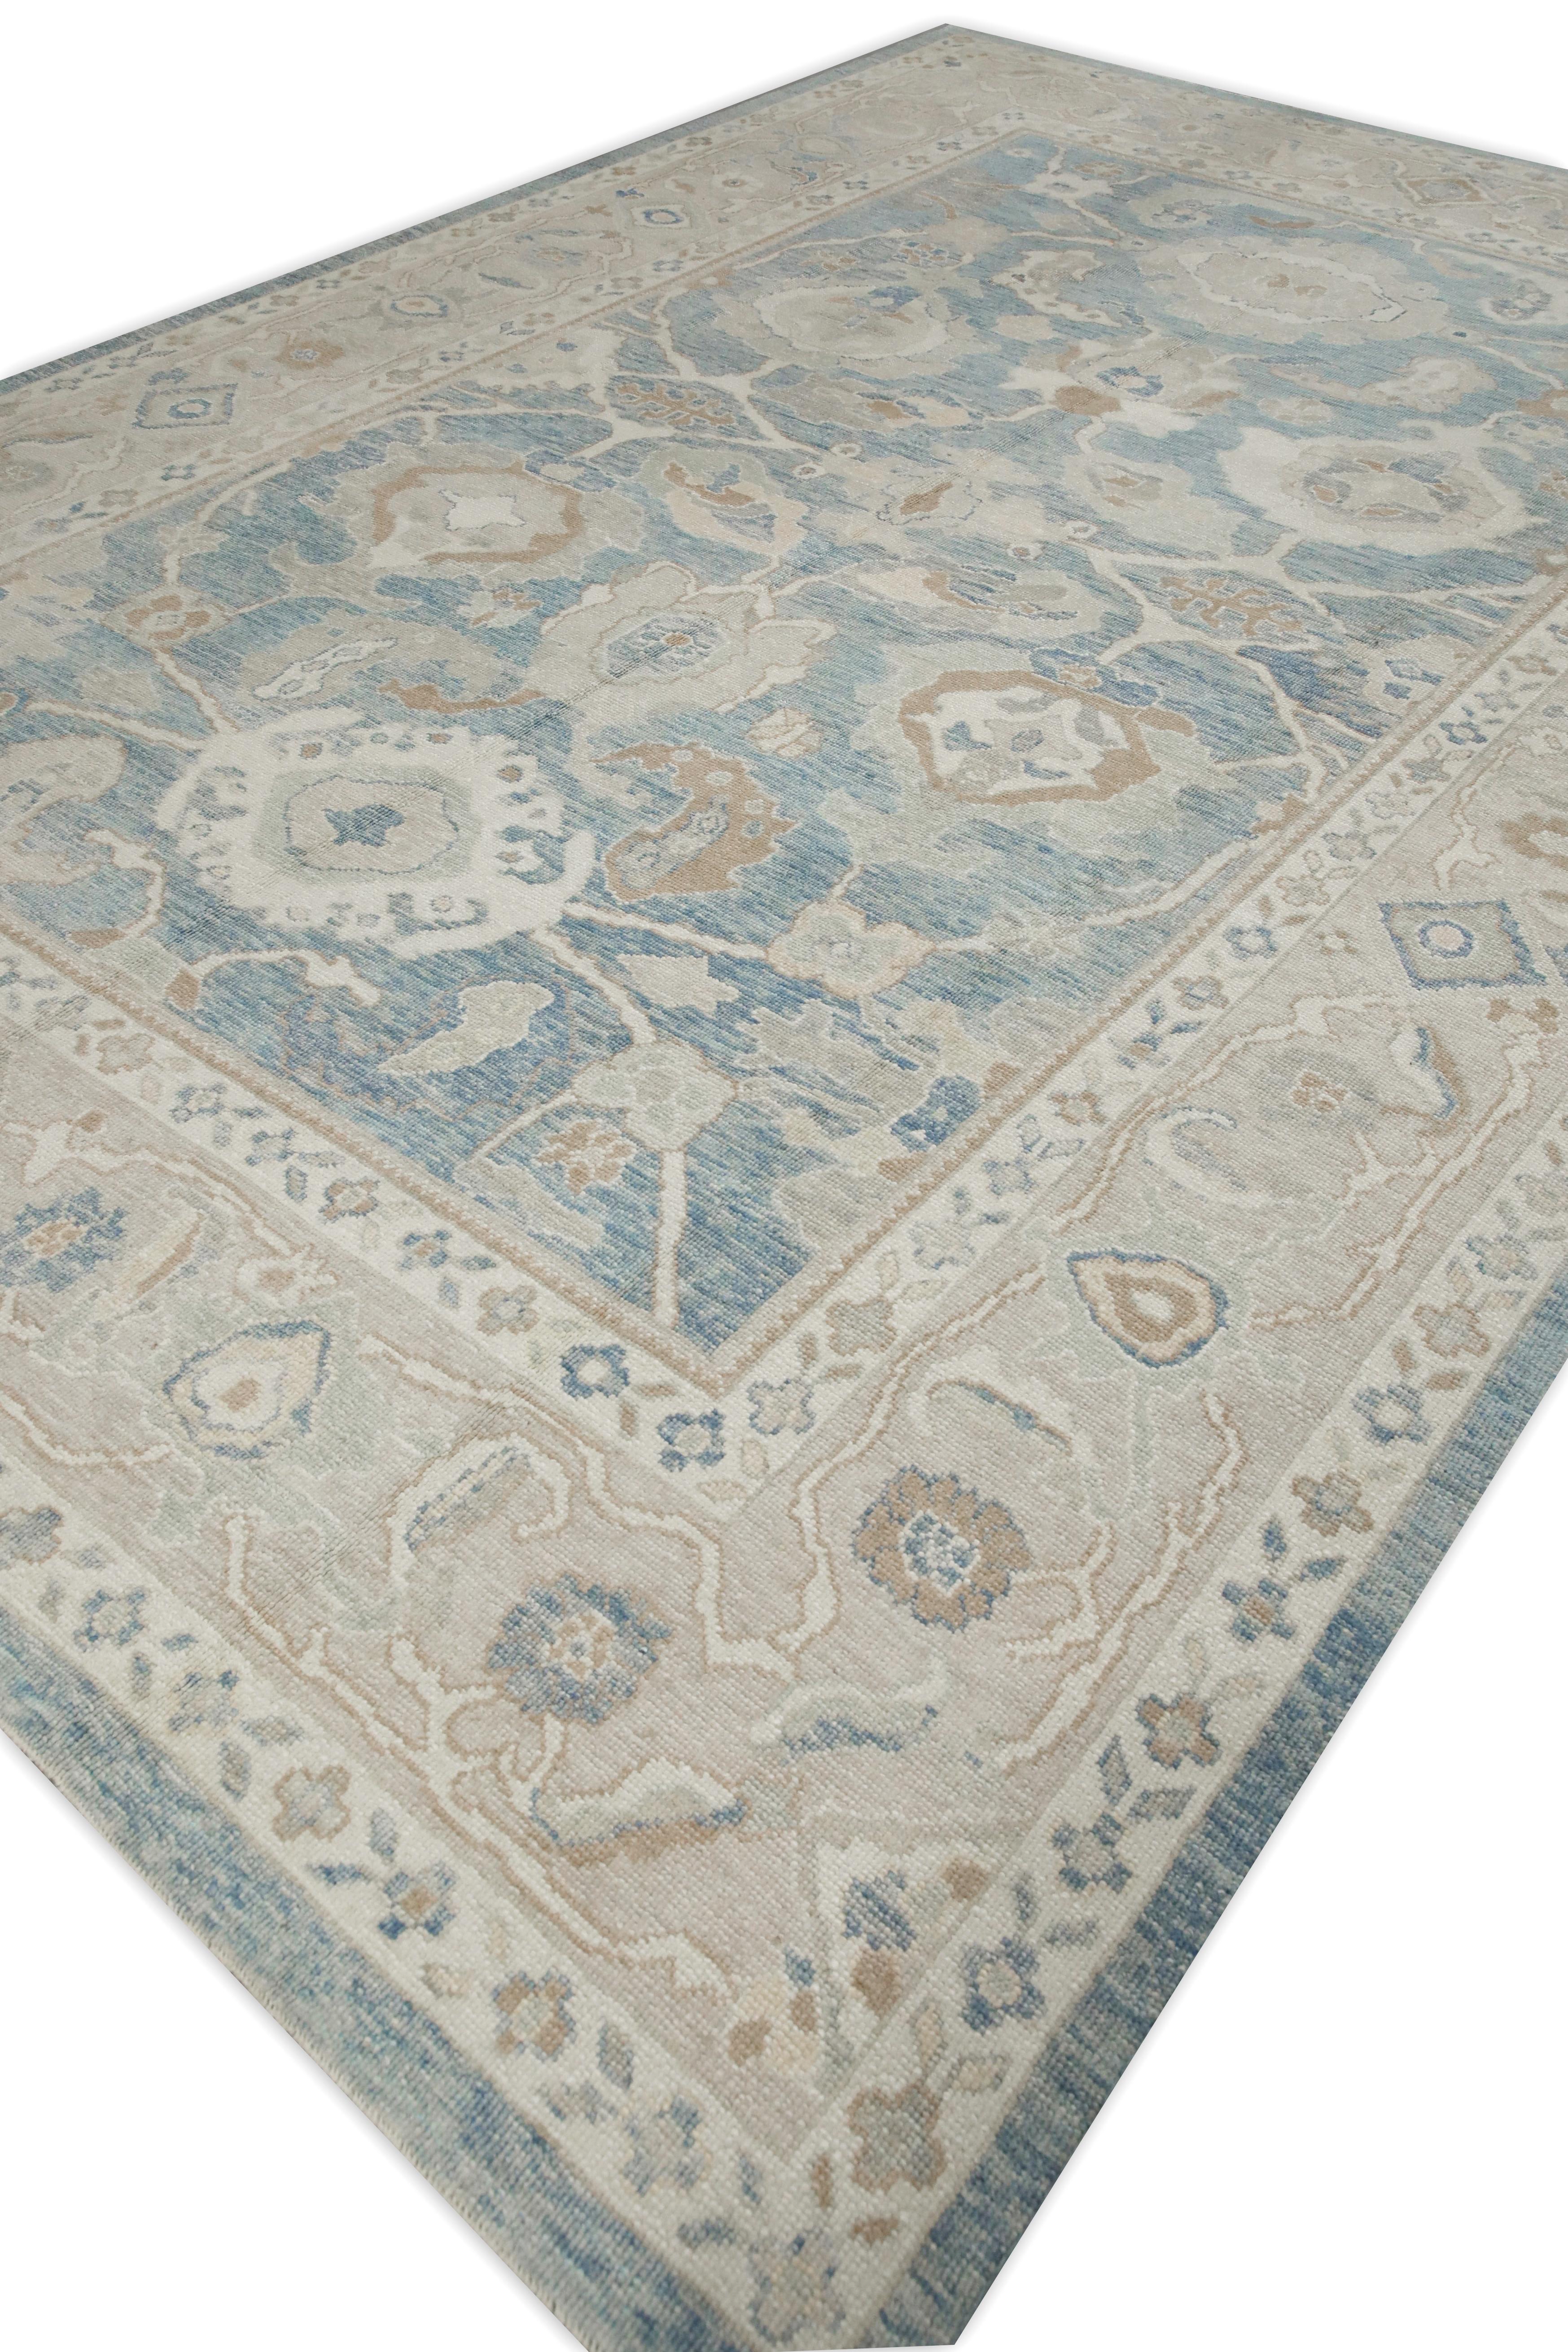 Contemporary Blue Floral Design Handwoven Wool Turkish Oushak Rug 10'3